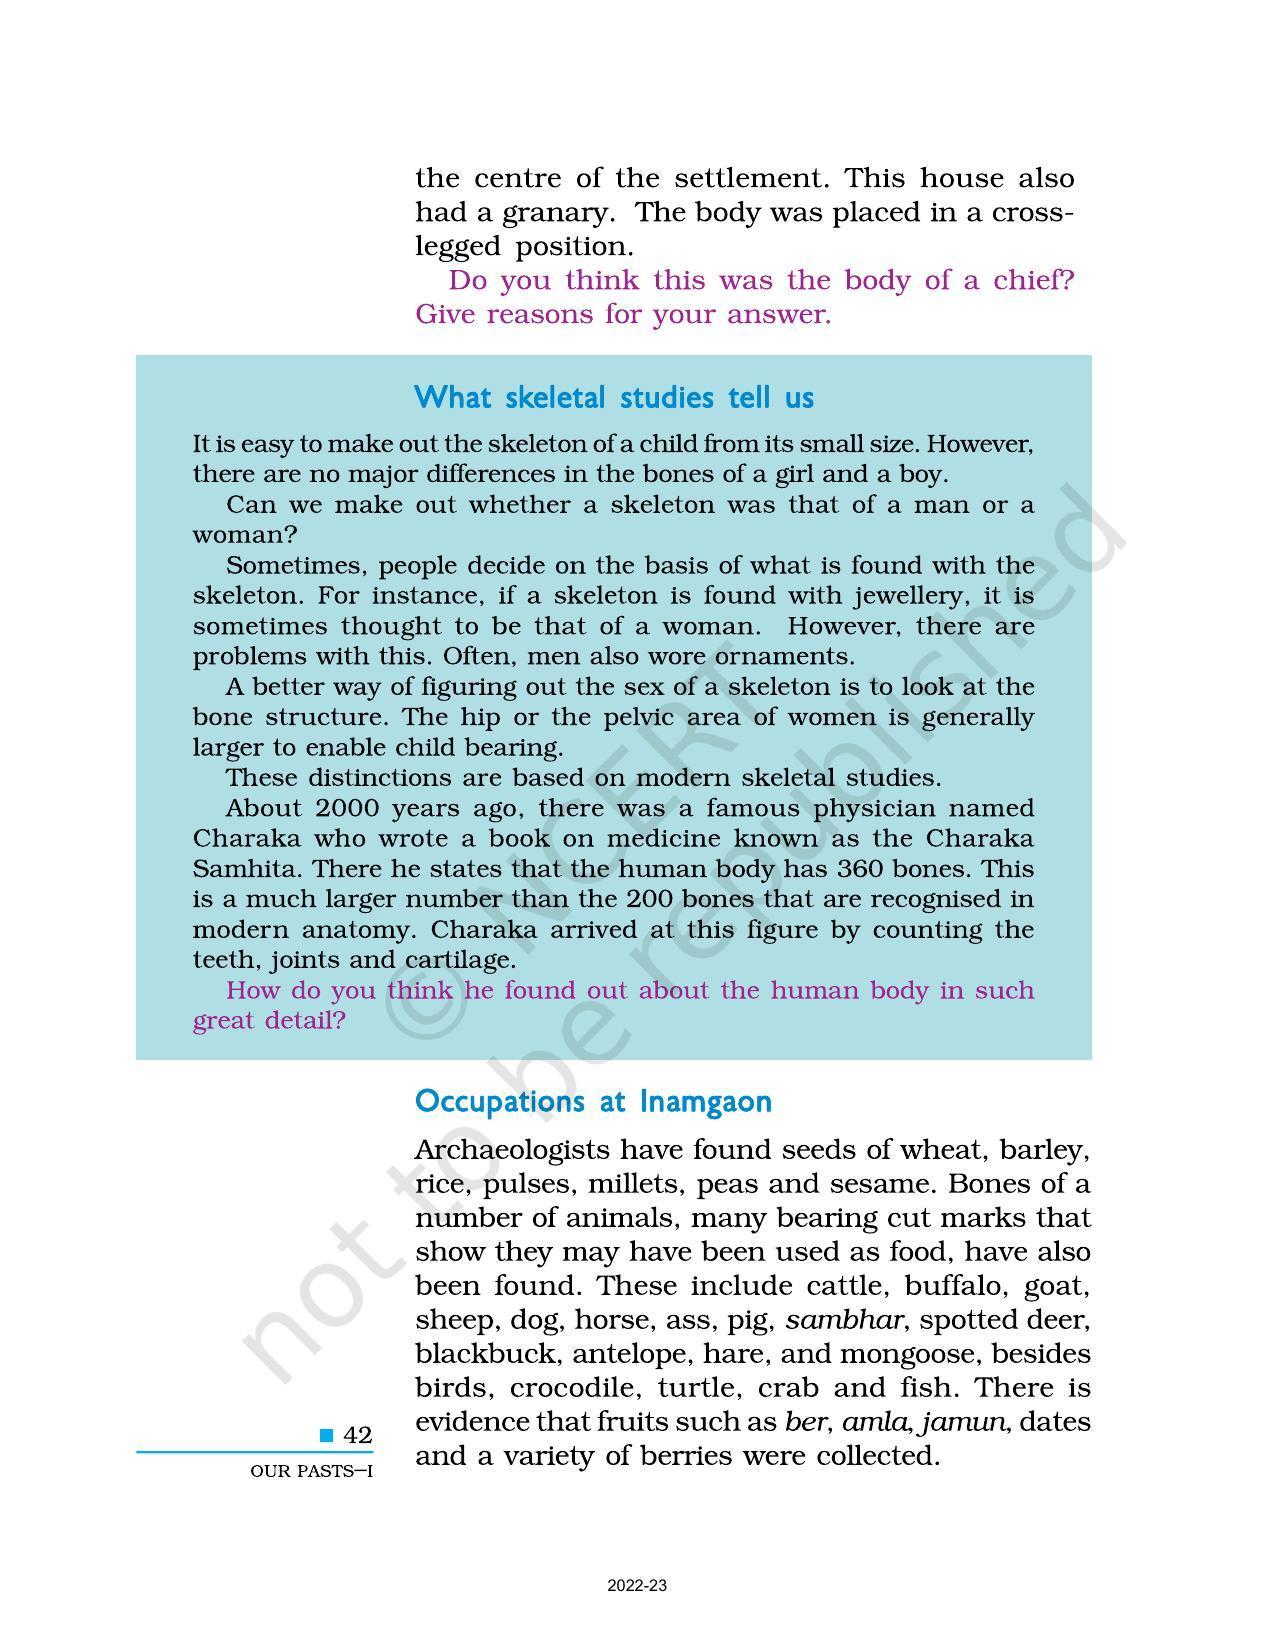 NCERT Book for Class 6 Social Science(History) : Chapter 4-What Books and Burials Tell Us - Page 8